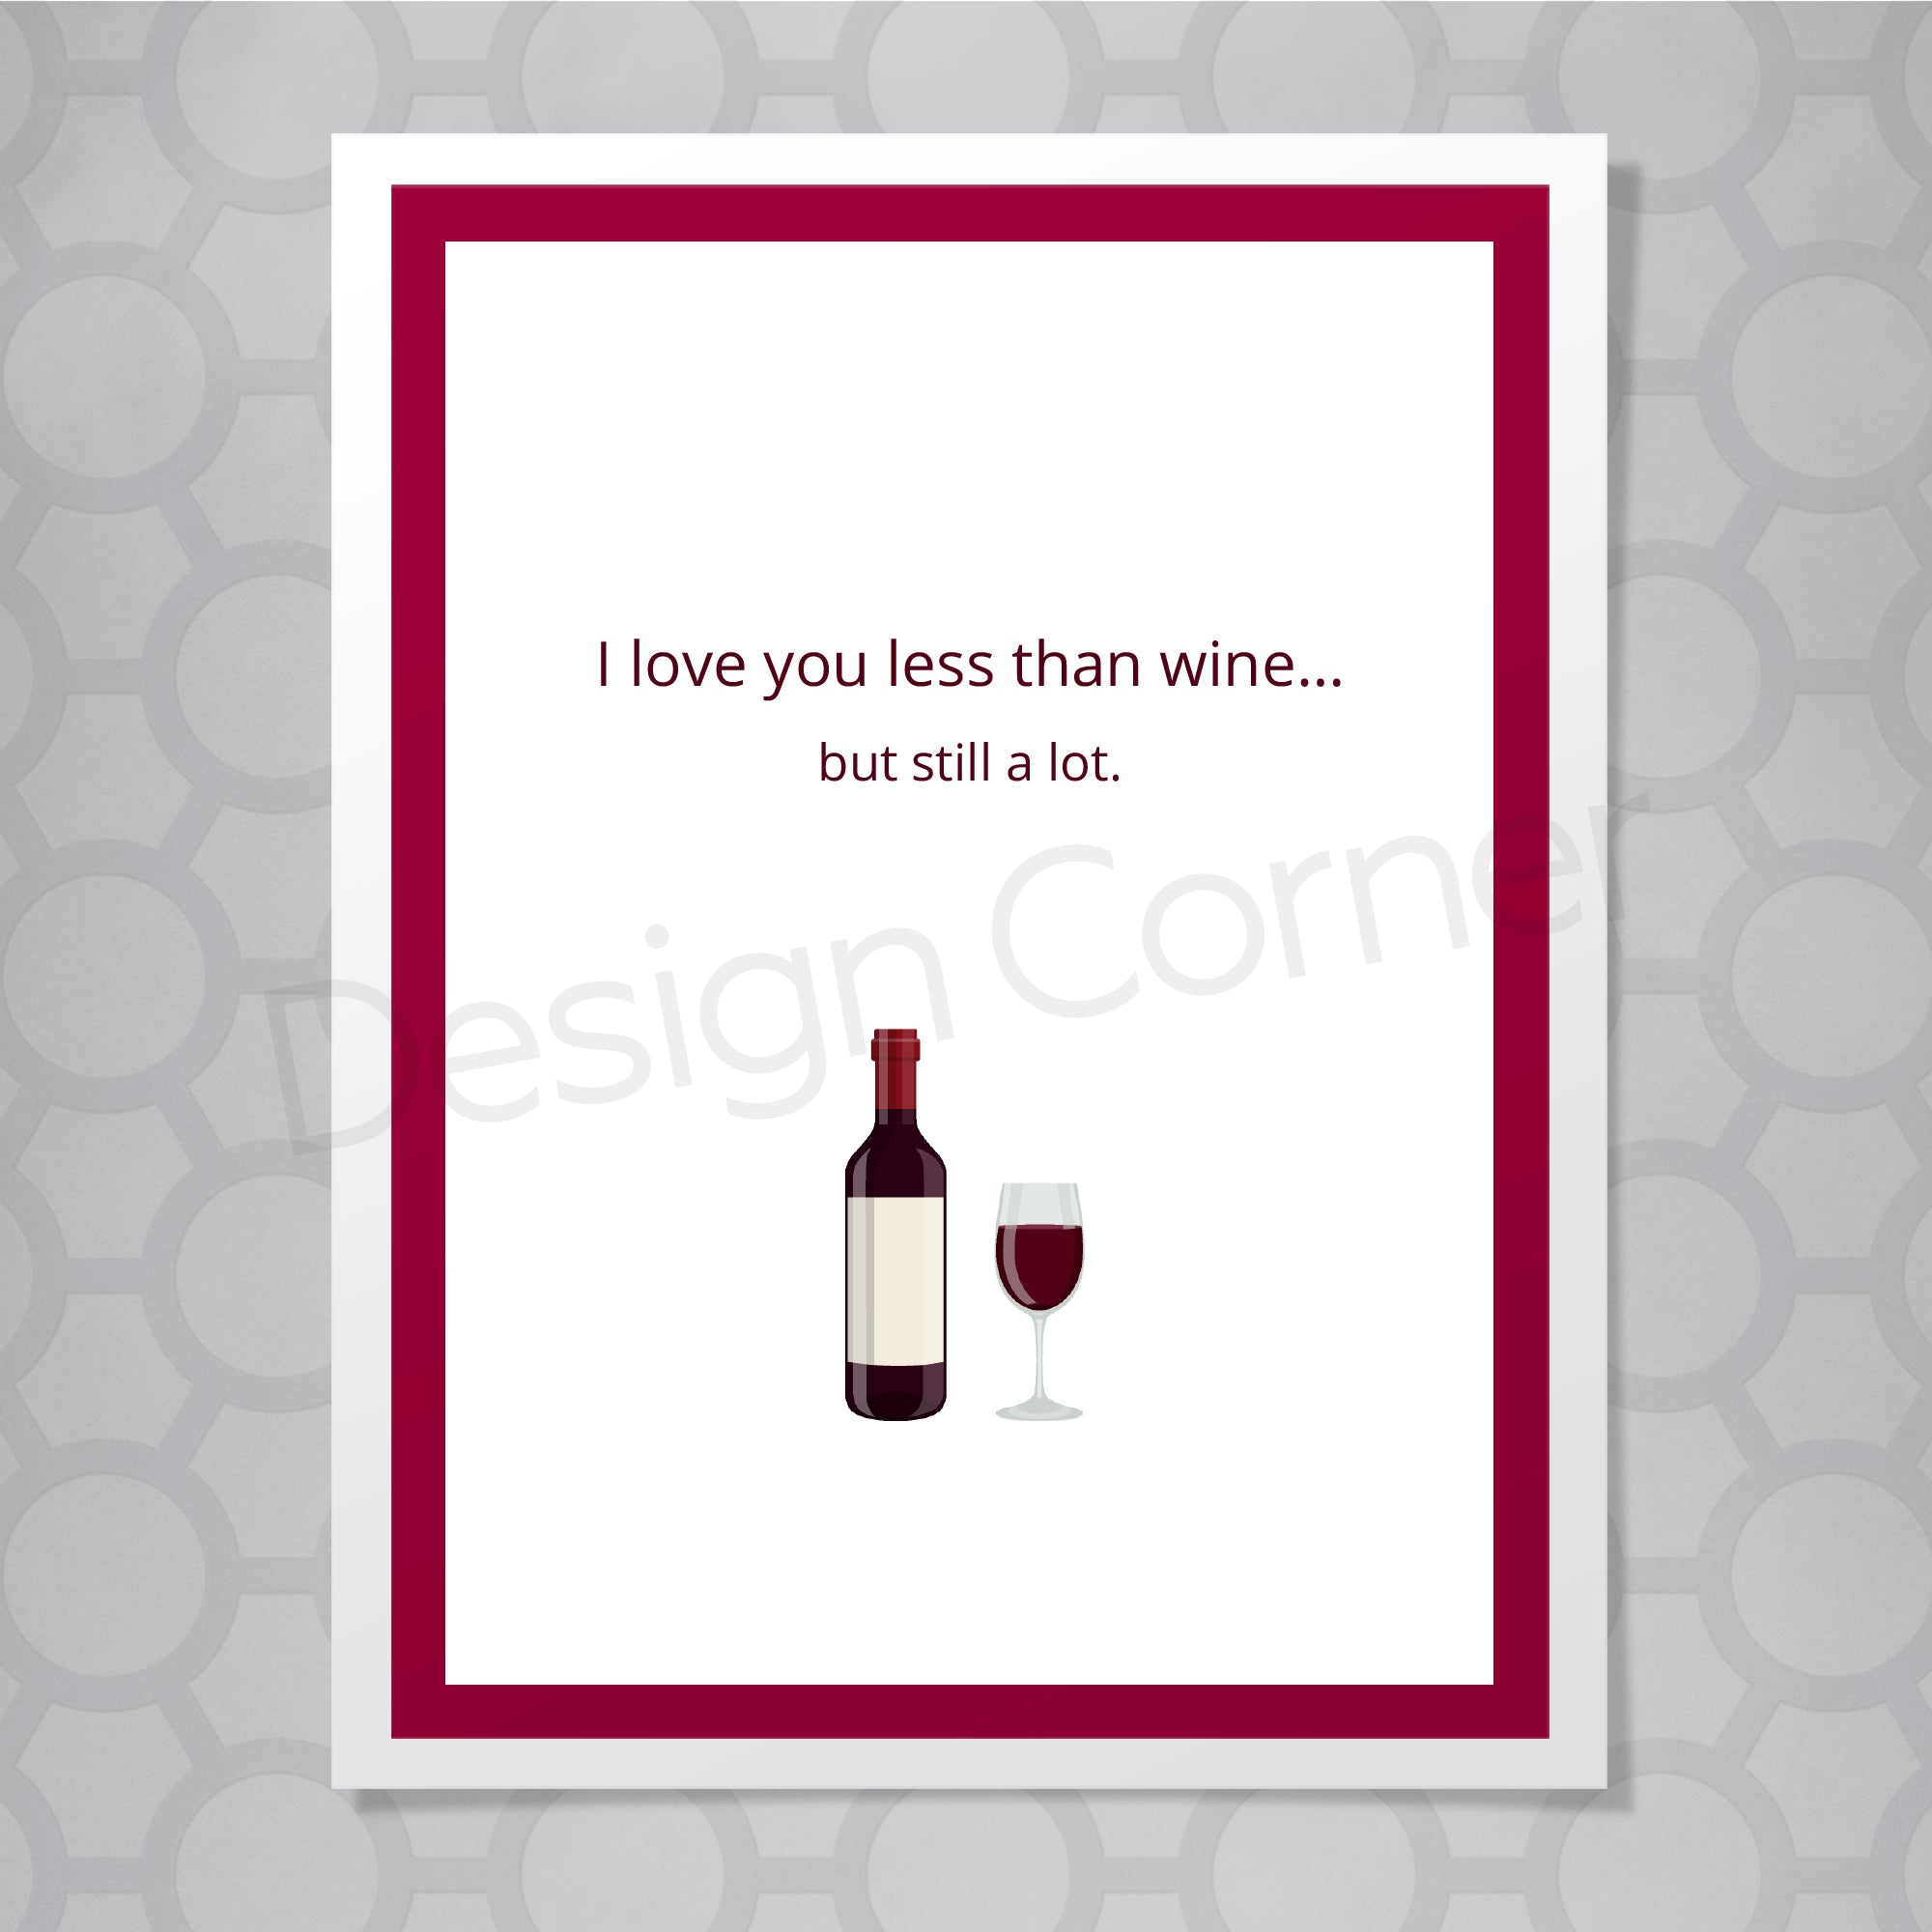 Illustration of wine bottle and wine glass on front of greeting card with caption "I love you less than wine... but still a lot."